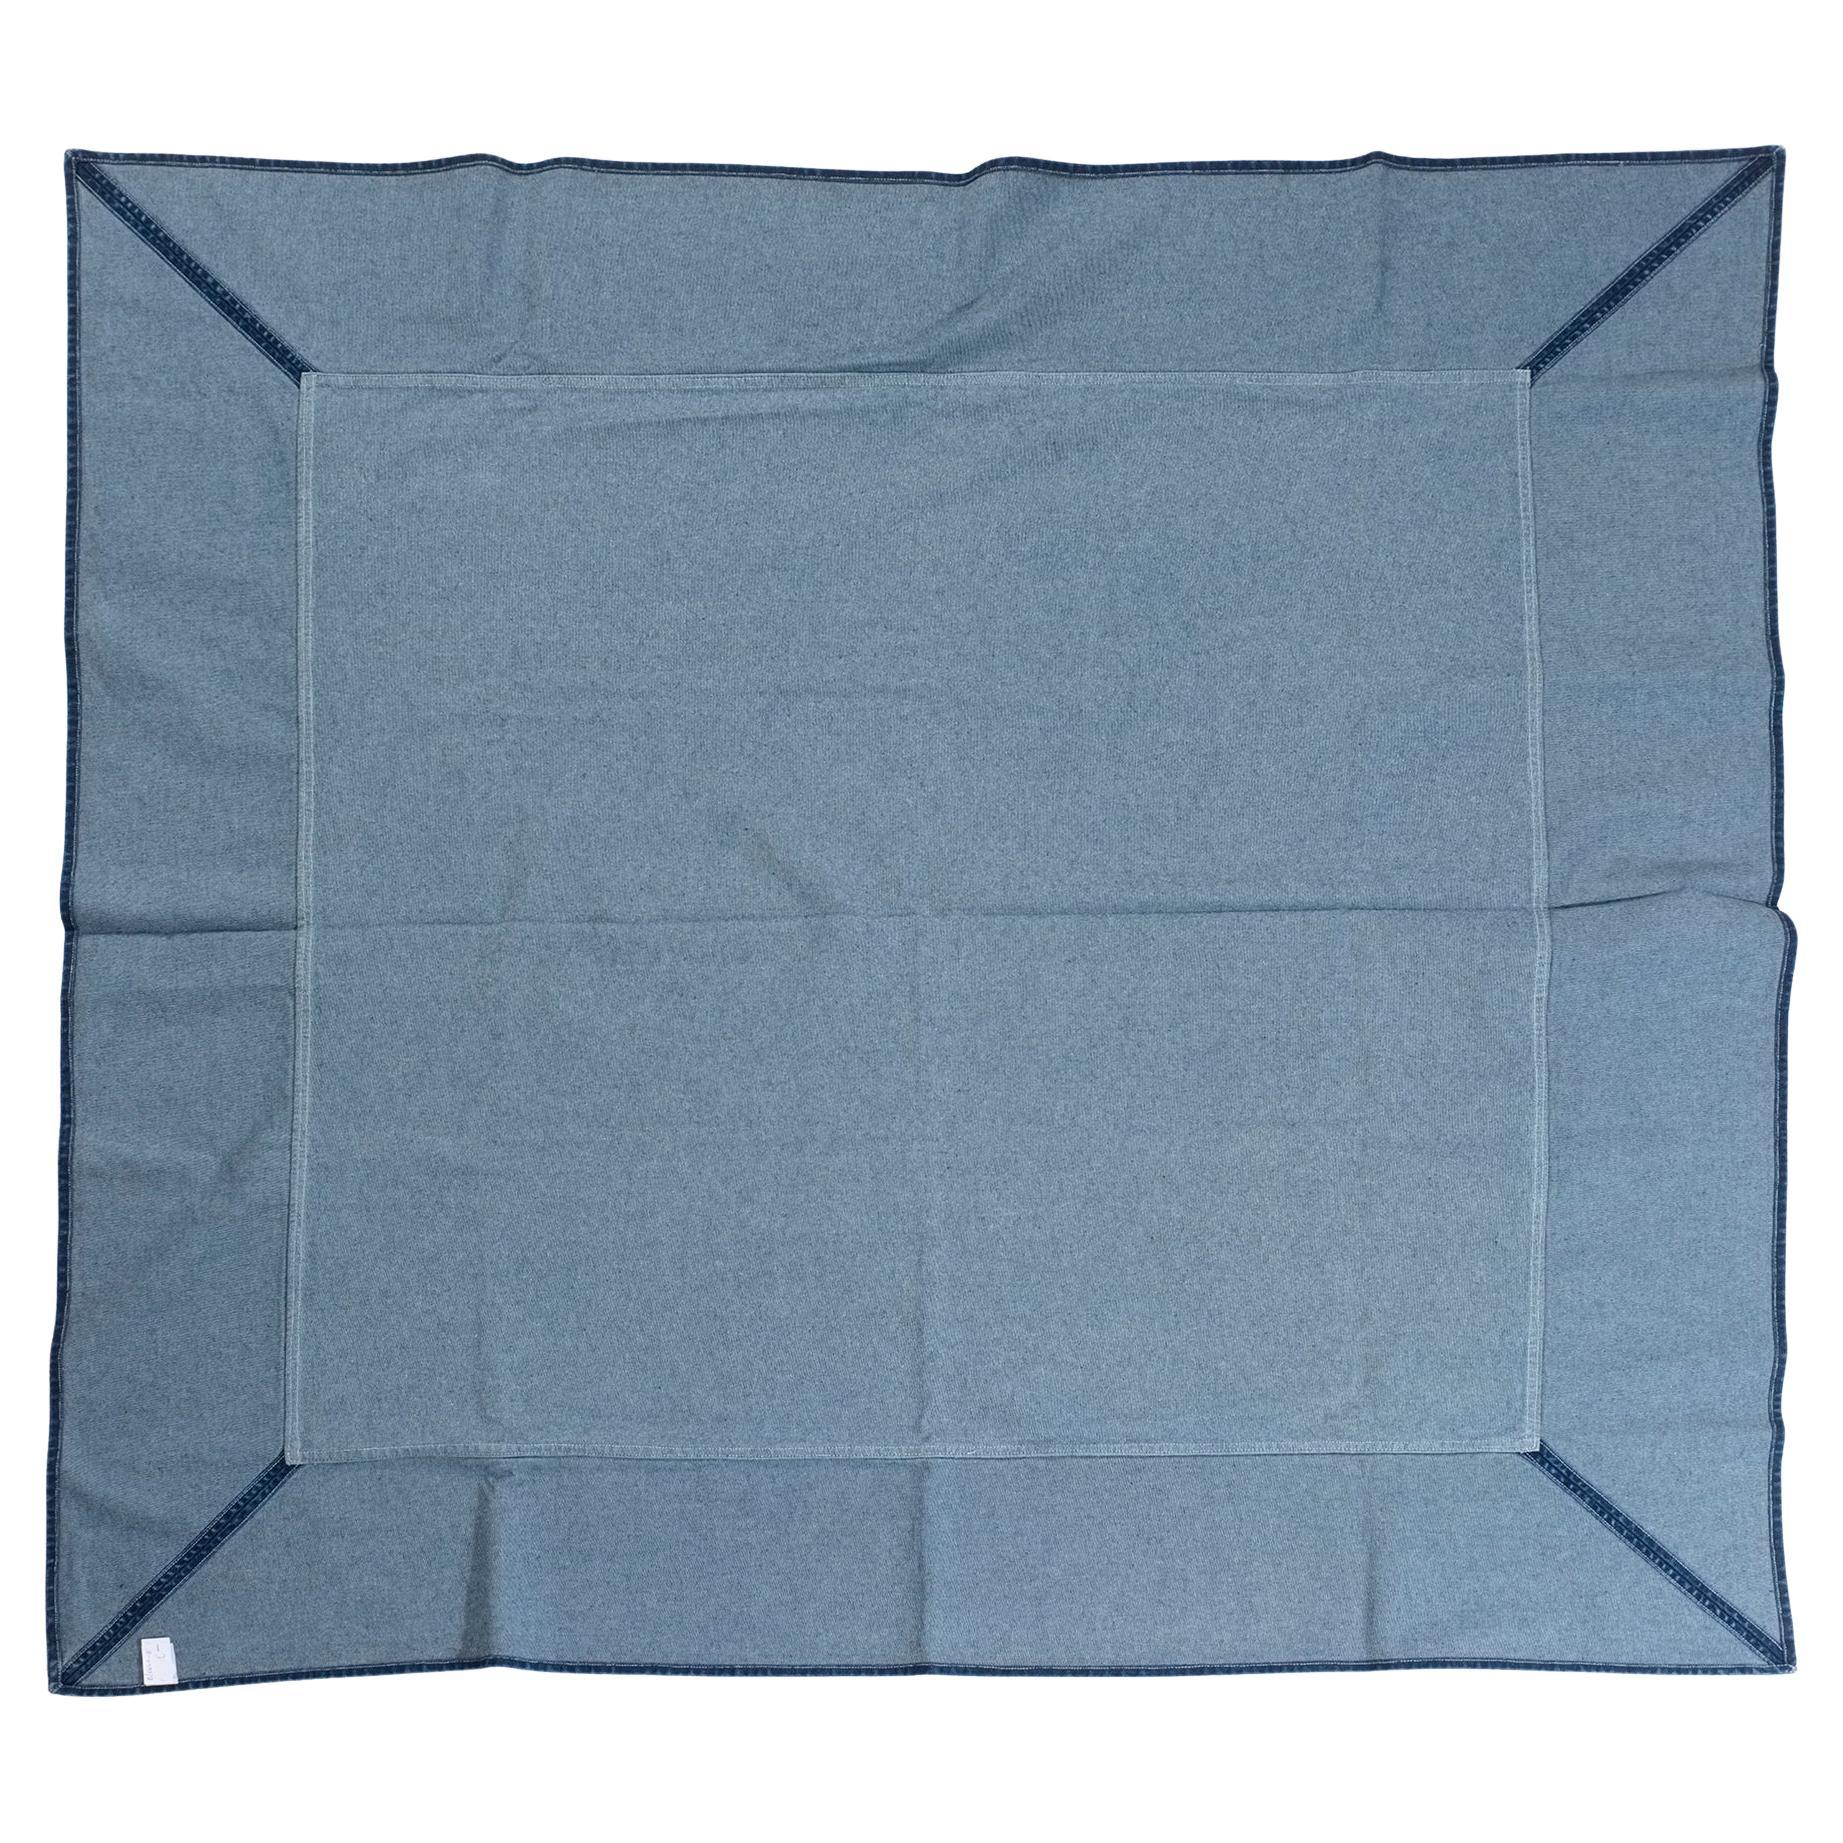 Italian Denim Tablecloth with Tablecloth Strap For Sale